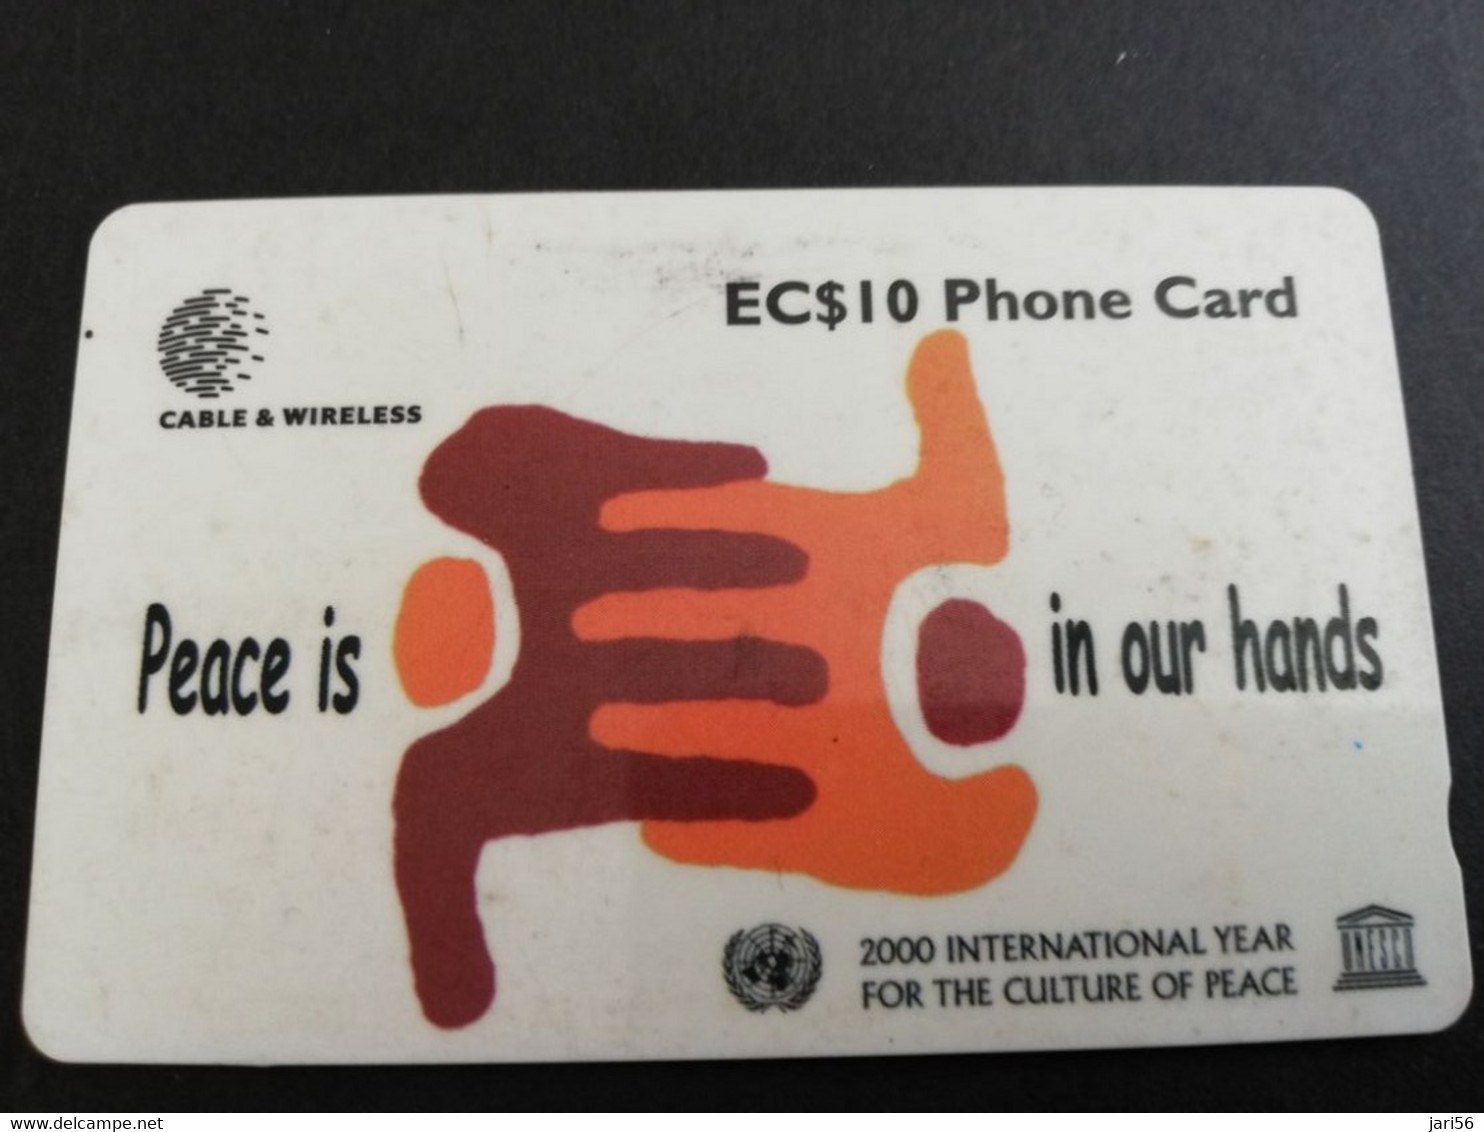 ST LUCIA    $ 10  CABLE & WIRELESS   PEACE IN OUR HANDS   338CSLB   Fine Used Card ** 5305** - St. Lucia